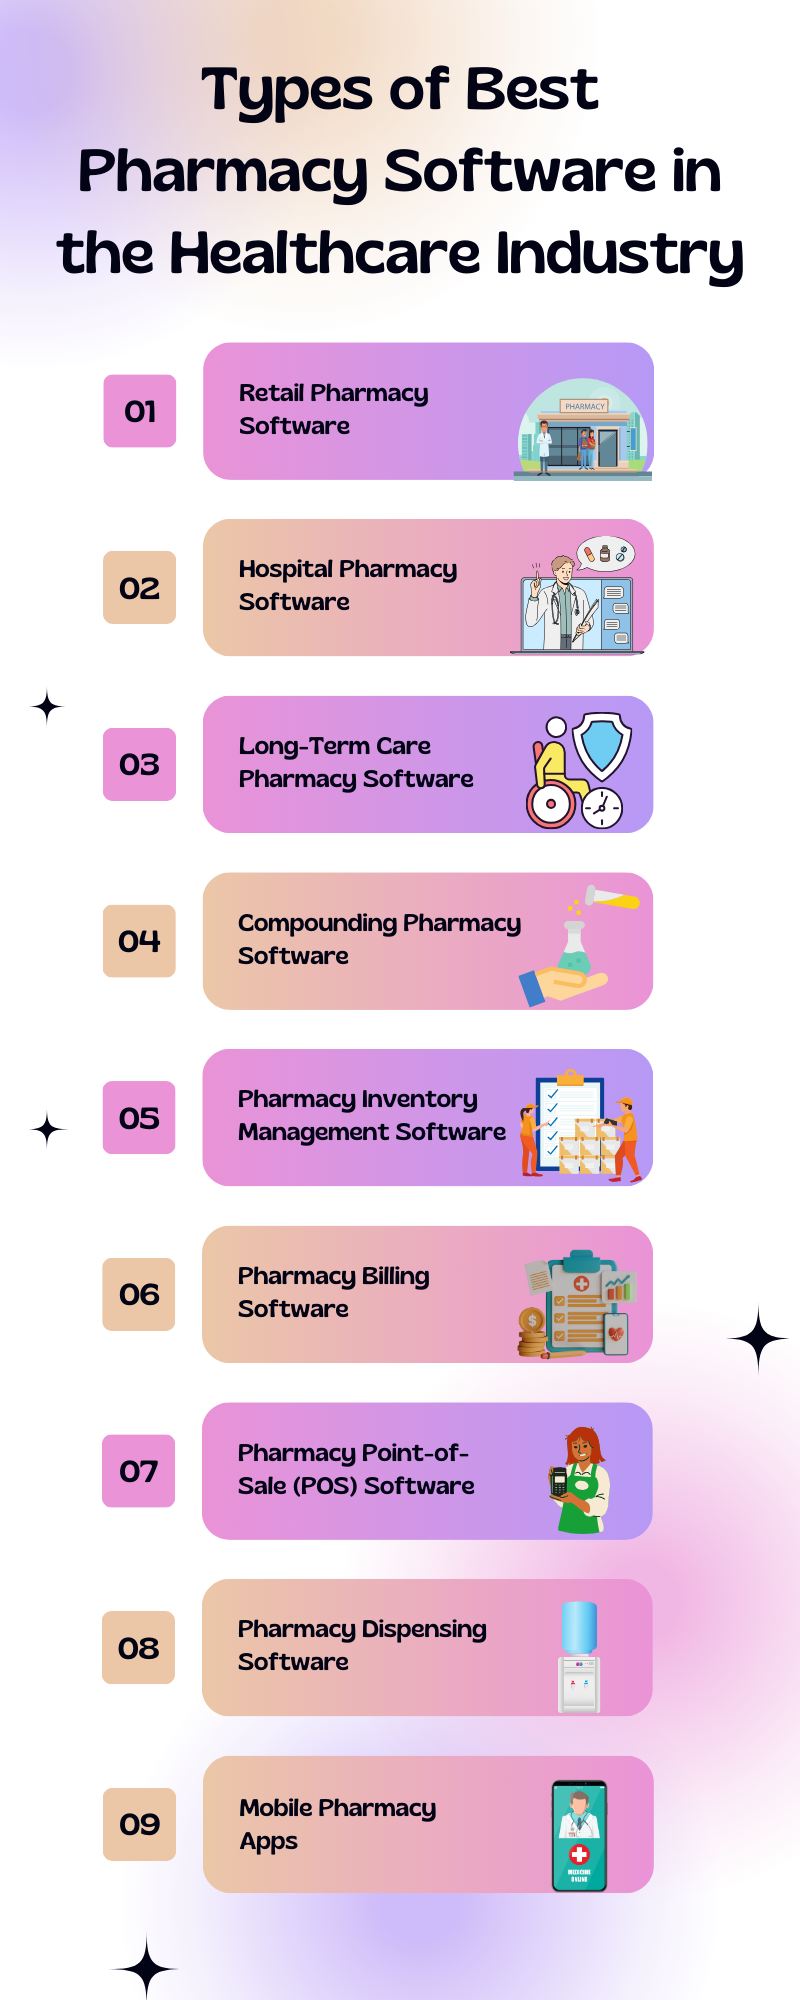 Best Pharmacy Software in the Healthcare